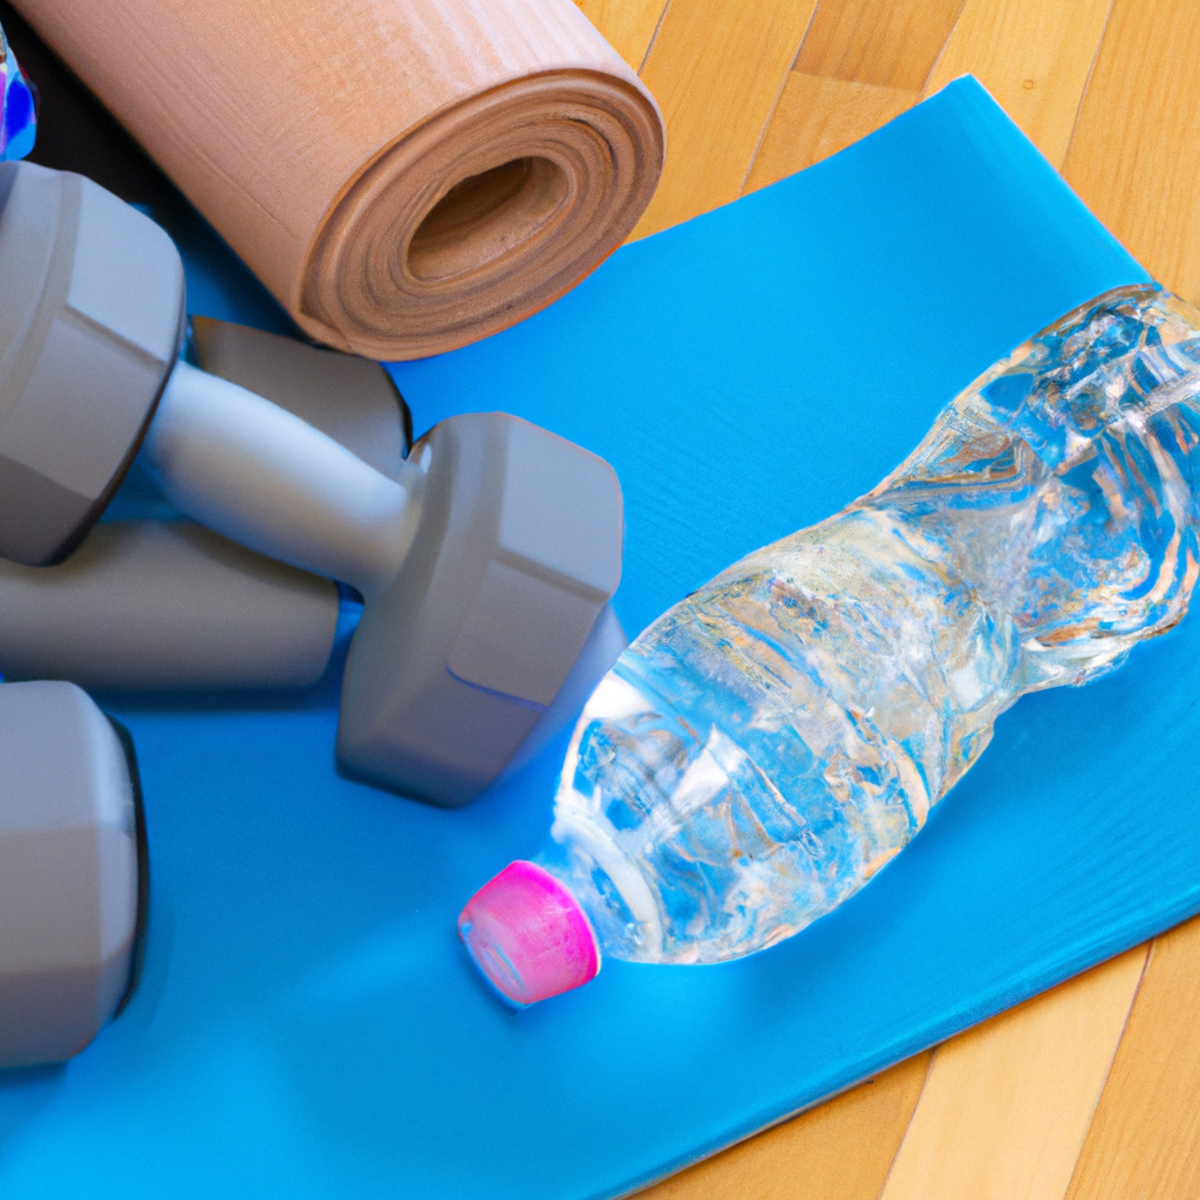 The photo shows a set of dumbbells, a yoga mat, and a water bottle arranged neatly on a wooden floor, indicating a readiness for virtual fitness classes. The dumbbells are of different weights, ranging from light to heavy, and are placed on either side of the yoga mat. The mat is rolled out and ready for use, with a small towel placed on top. The water bottle is positioned next to the mat, indicating that the person using the equipment is prepared for a workout, possibly in the context of virtual fitness classes. The lighting in the photo is bright and natural, giving the impression that the person is working out in a well-lit room. The overall composition of the photo is clean and organized, suggesting that the person using the equipment is disciplined and focused on their fitness goals, perhaps with the guidance of virtual fitness classes.